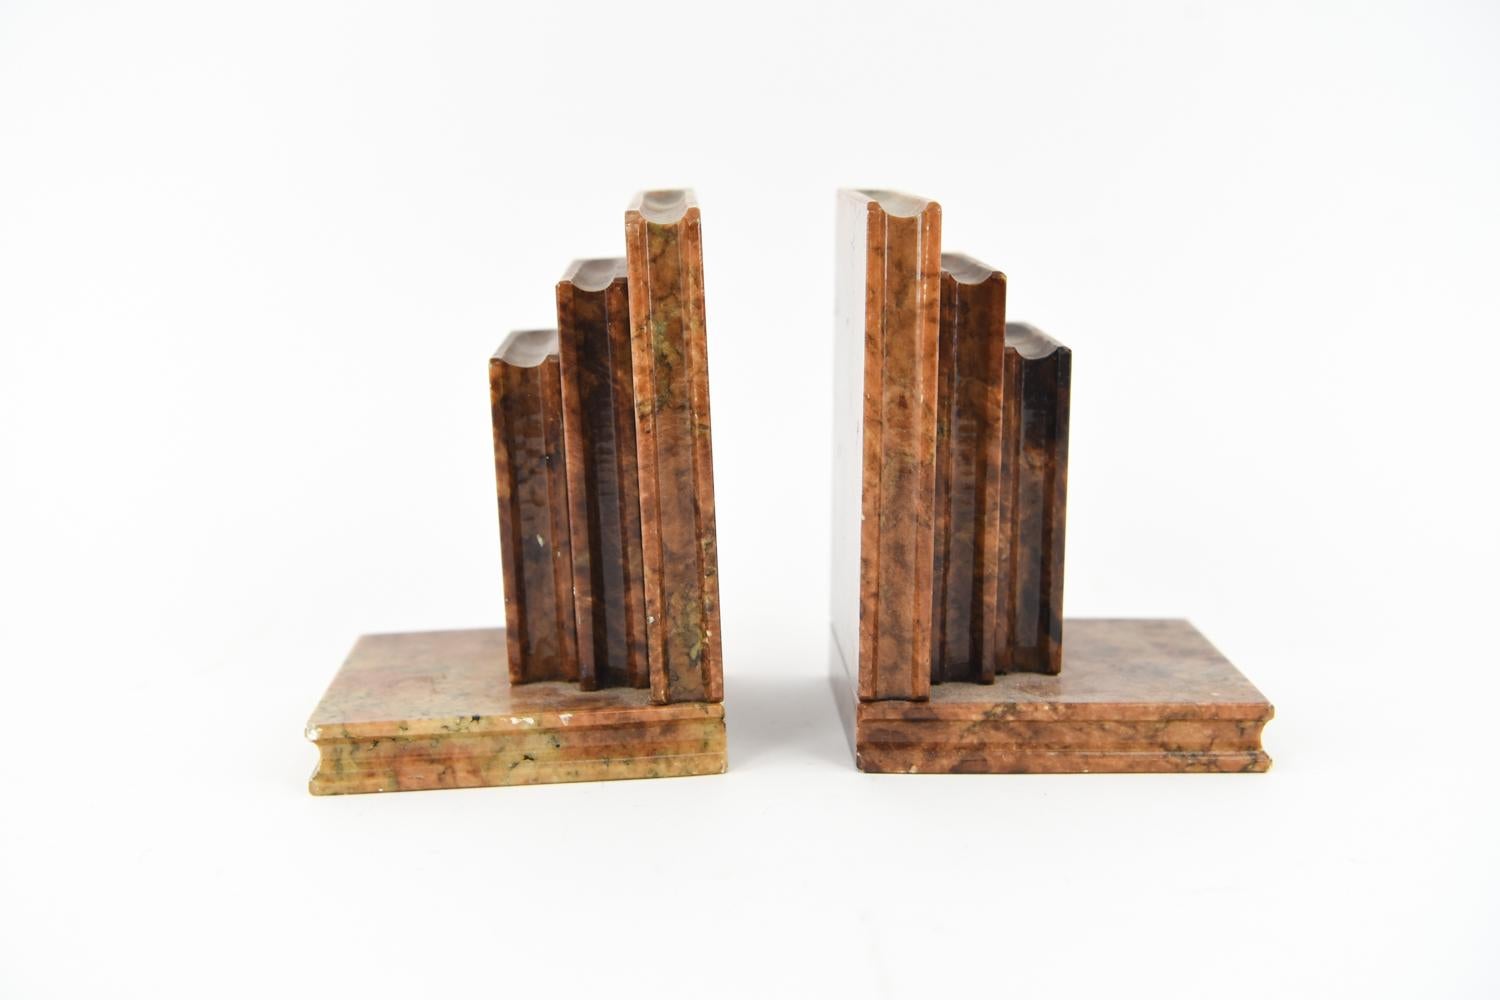 Carved Pair of Midcentury Italian Alabaster Stacked-Book Bookends, Manner of Noymer